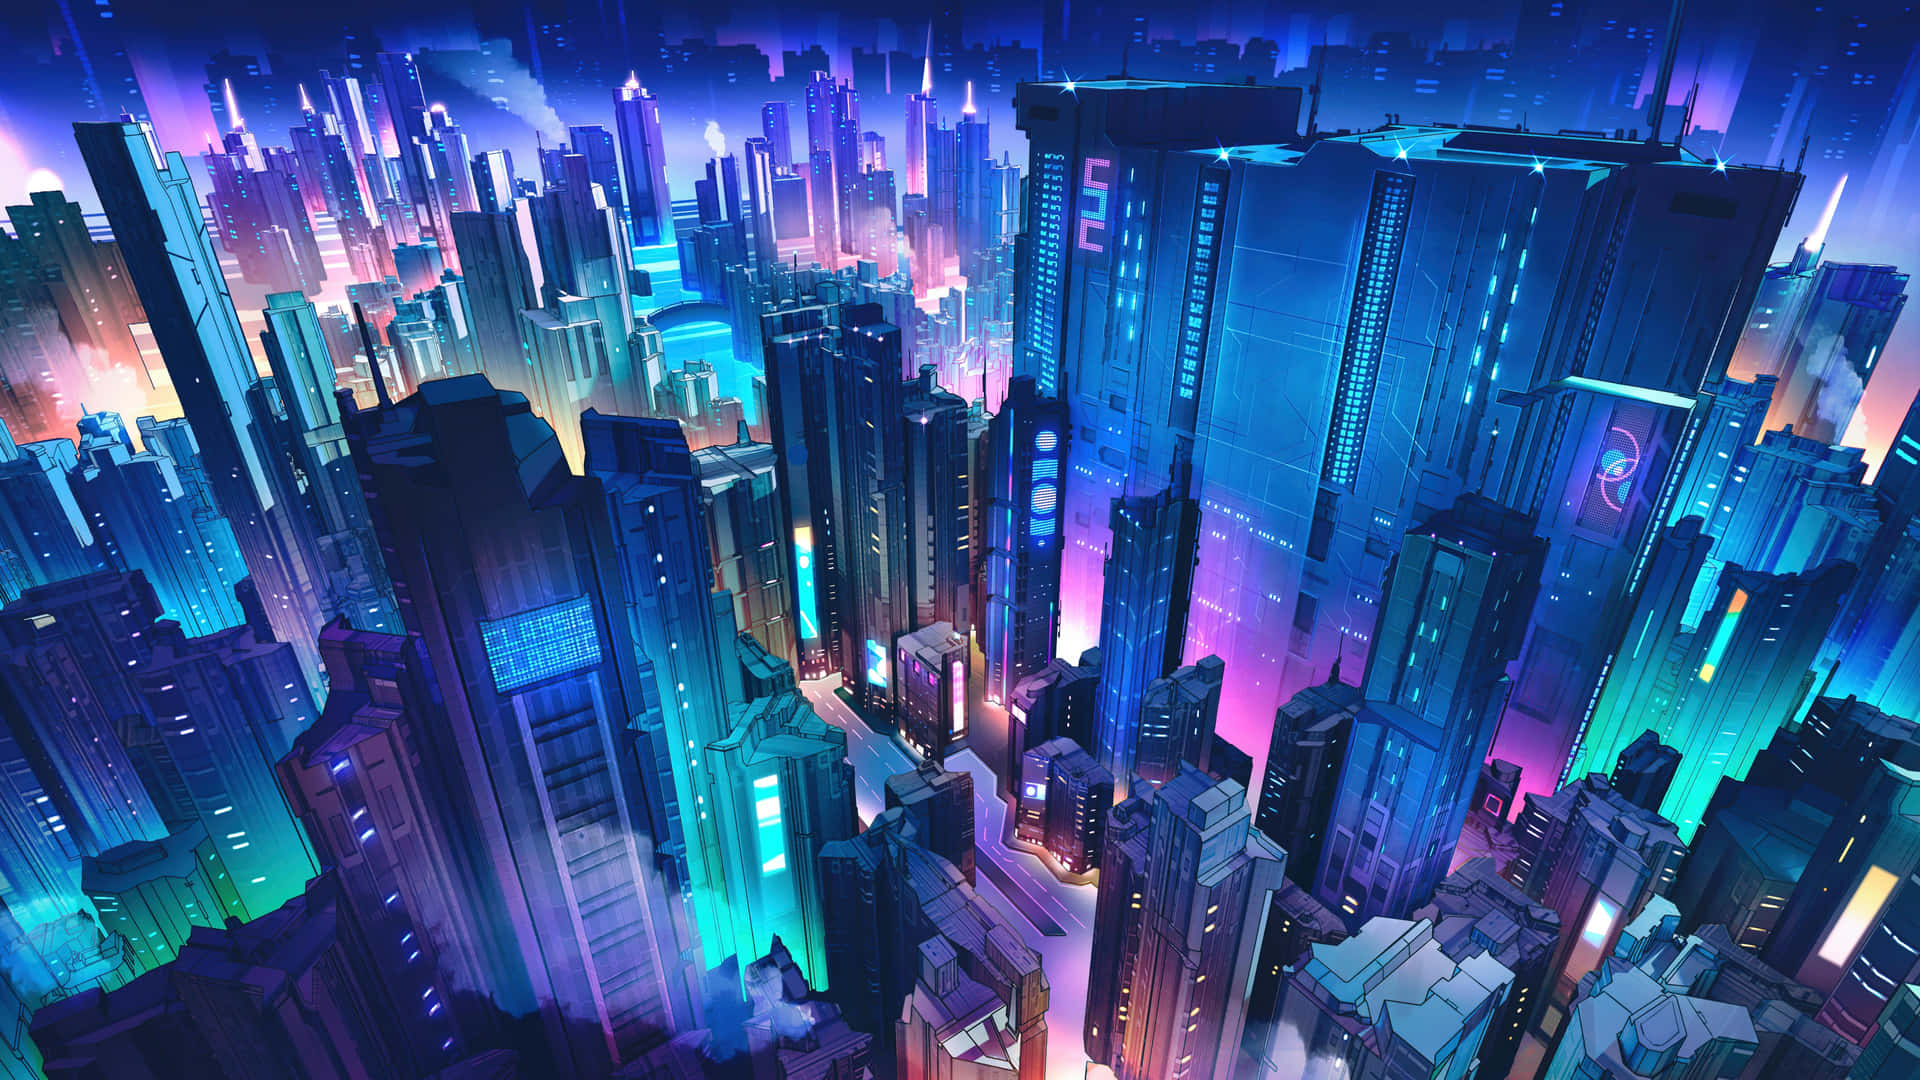 A glowing city skyline illuminated by a vibrant spectrum of neon colors. Wallpaper